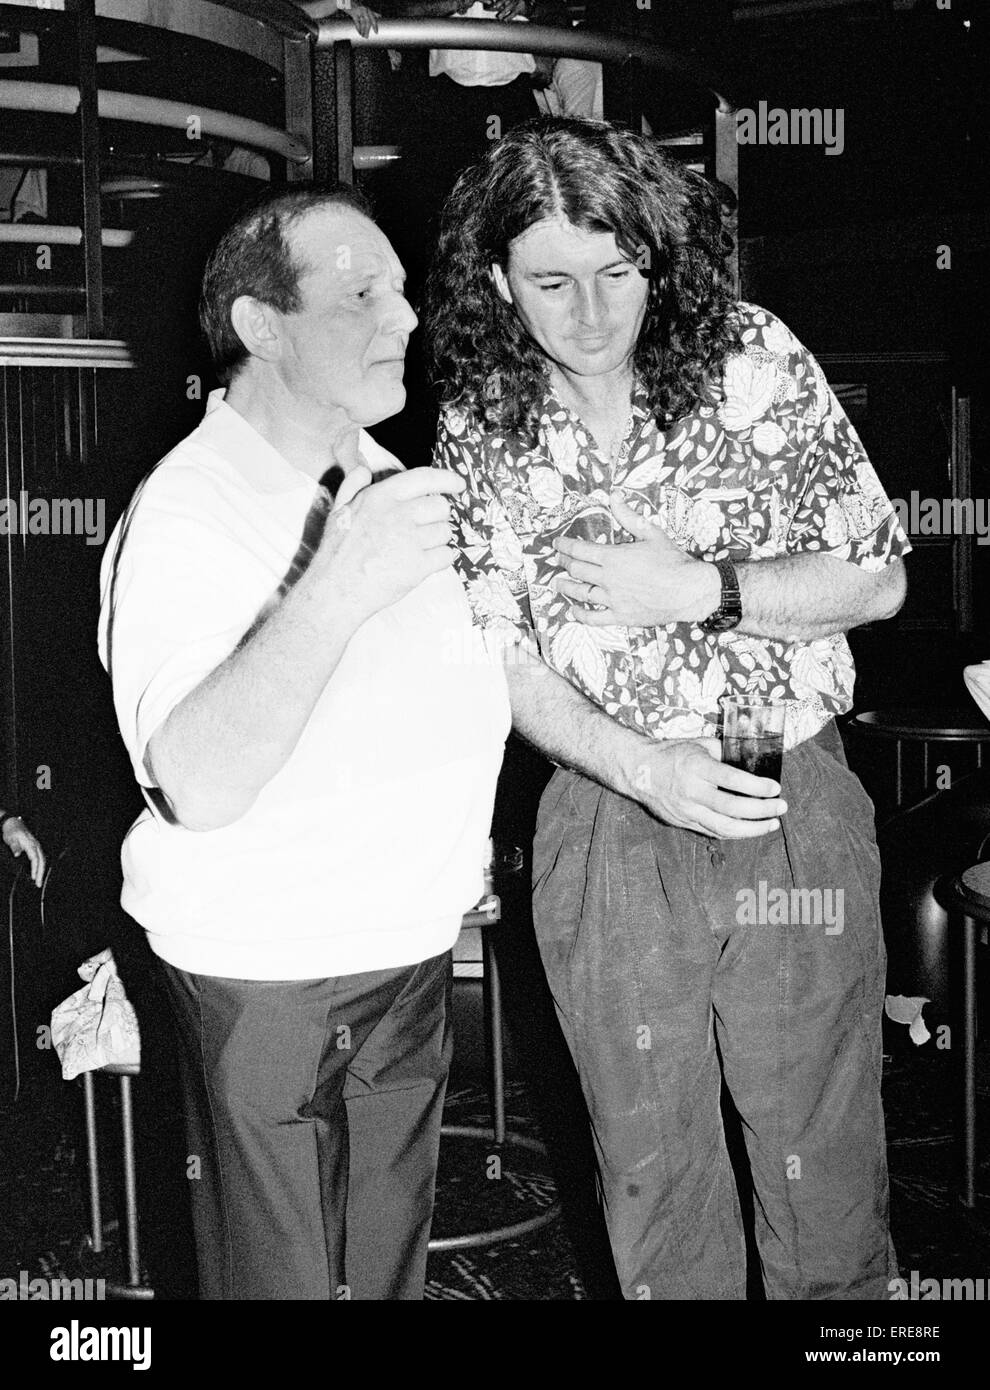 Jim Marshall, OBE (left, b. 1923), founder of Marshall Amplification, is pictured talking with Ian Gillan (b. 1945), singer with the band Deep Purple, at a private function in London in 1988. Jim is known as 'The Father of Loud'. Stock Photo